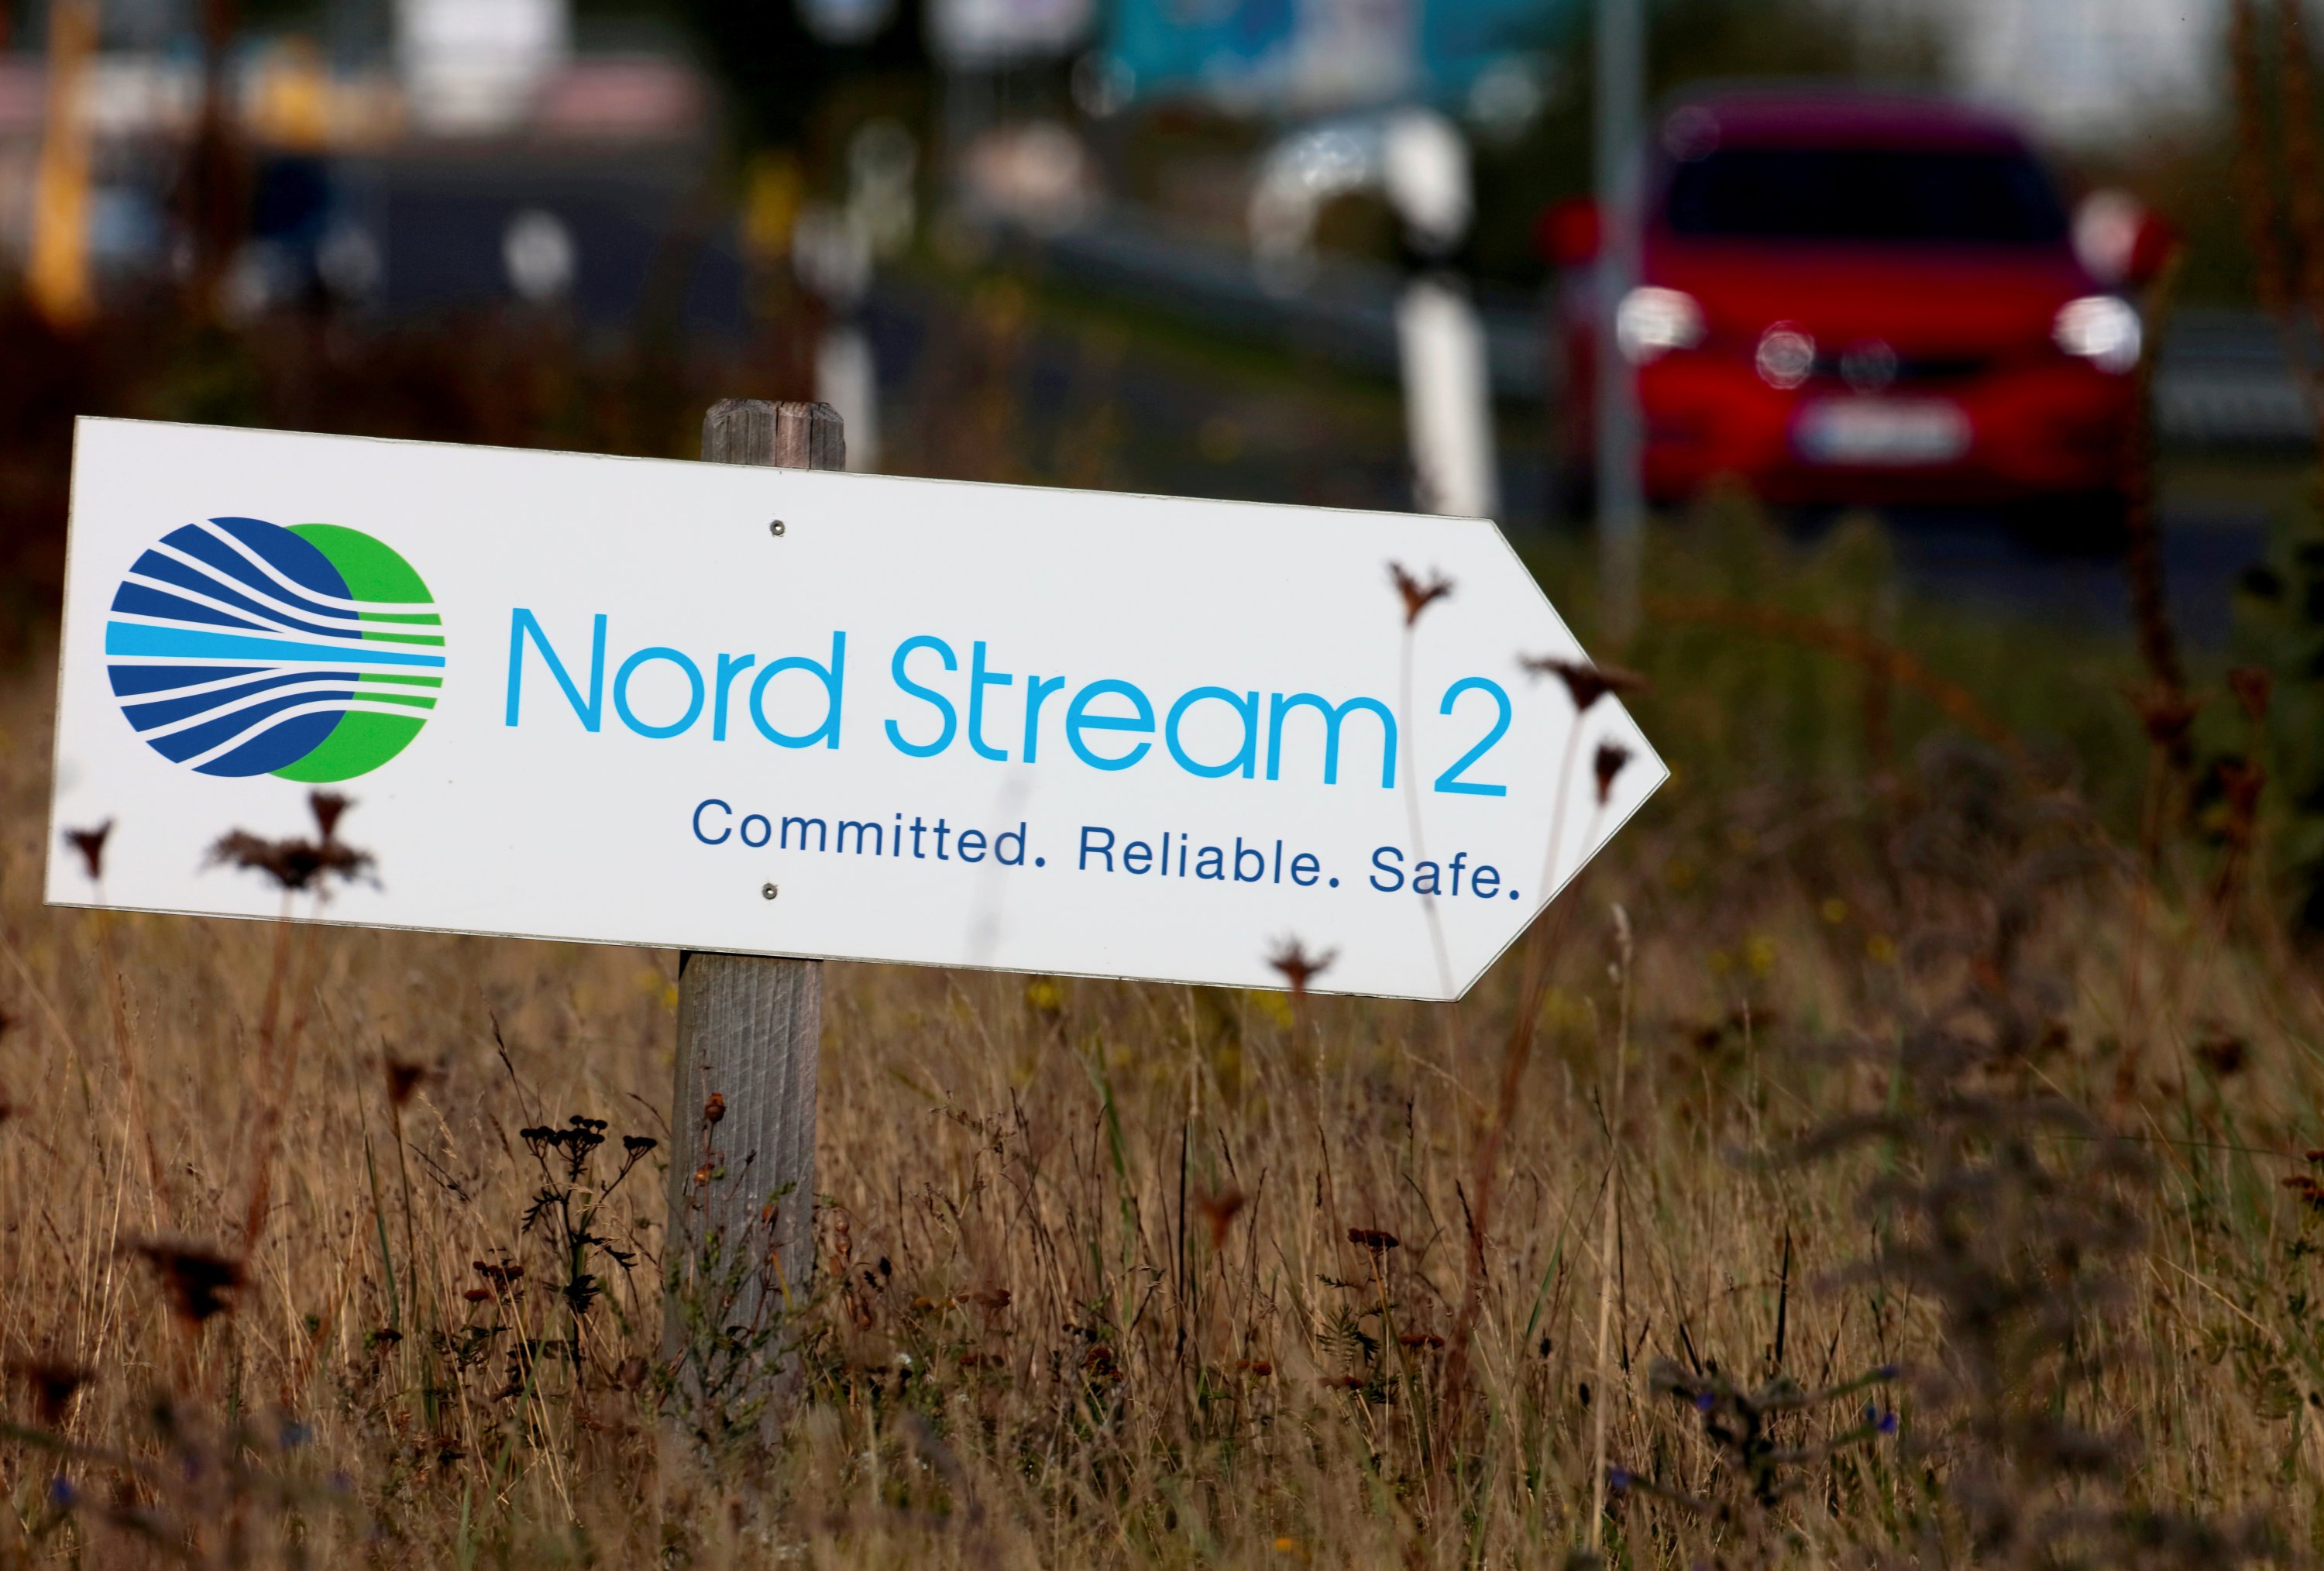 A road sign directs traffic towards the Nord Stream 2 gas line landfall facility entrance in Lubmin, Germany, Sept. 10, 2020. (Reuters Photo)